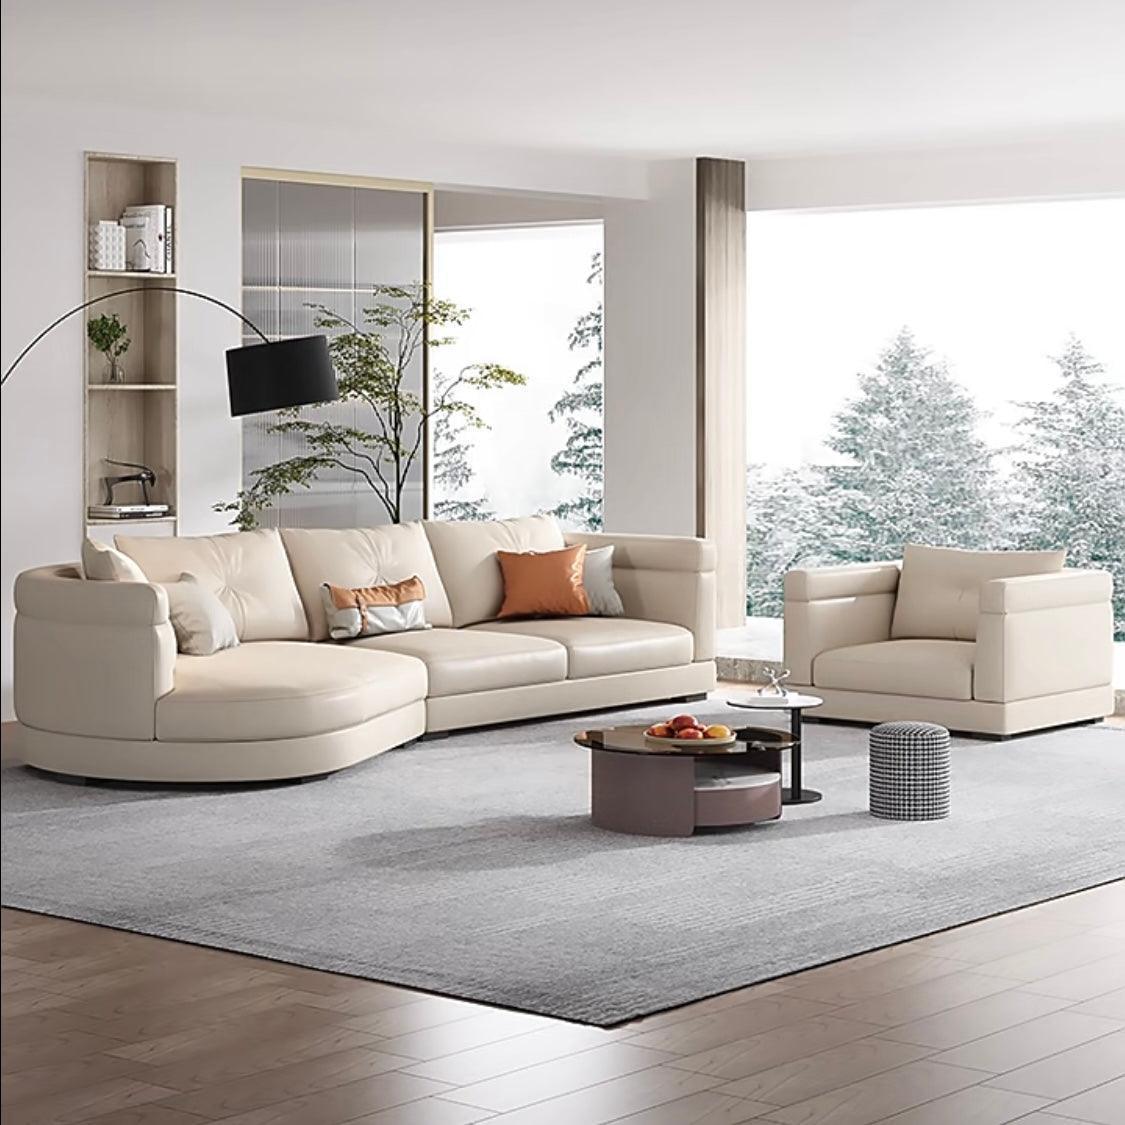 home-atelier-f31a Leather-Aire / Length 250cm with curve chaise / White Baxter Designer Sectional Round Chaise Sofa